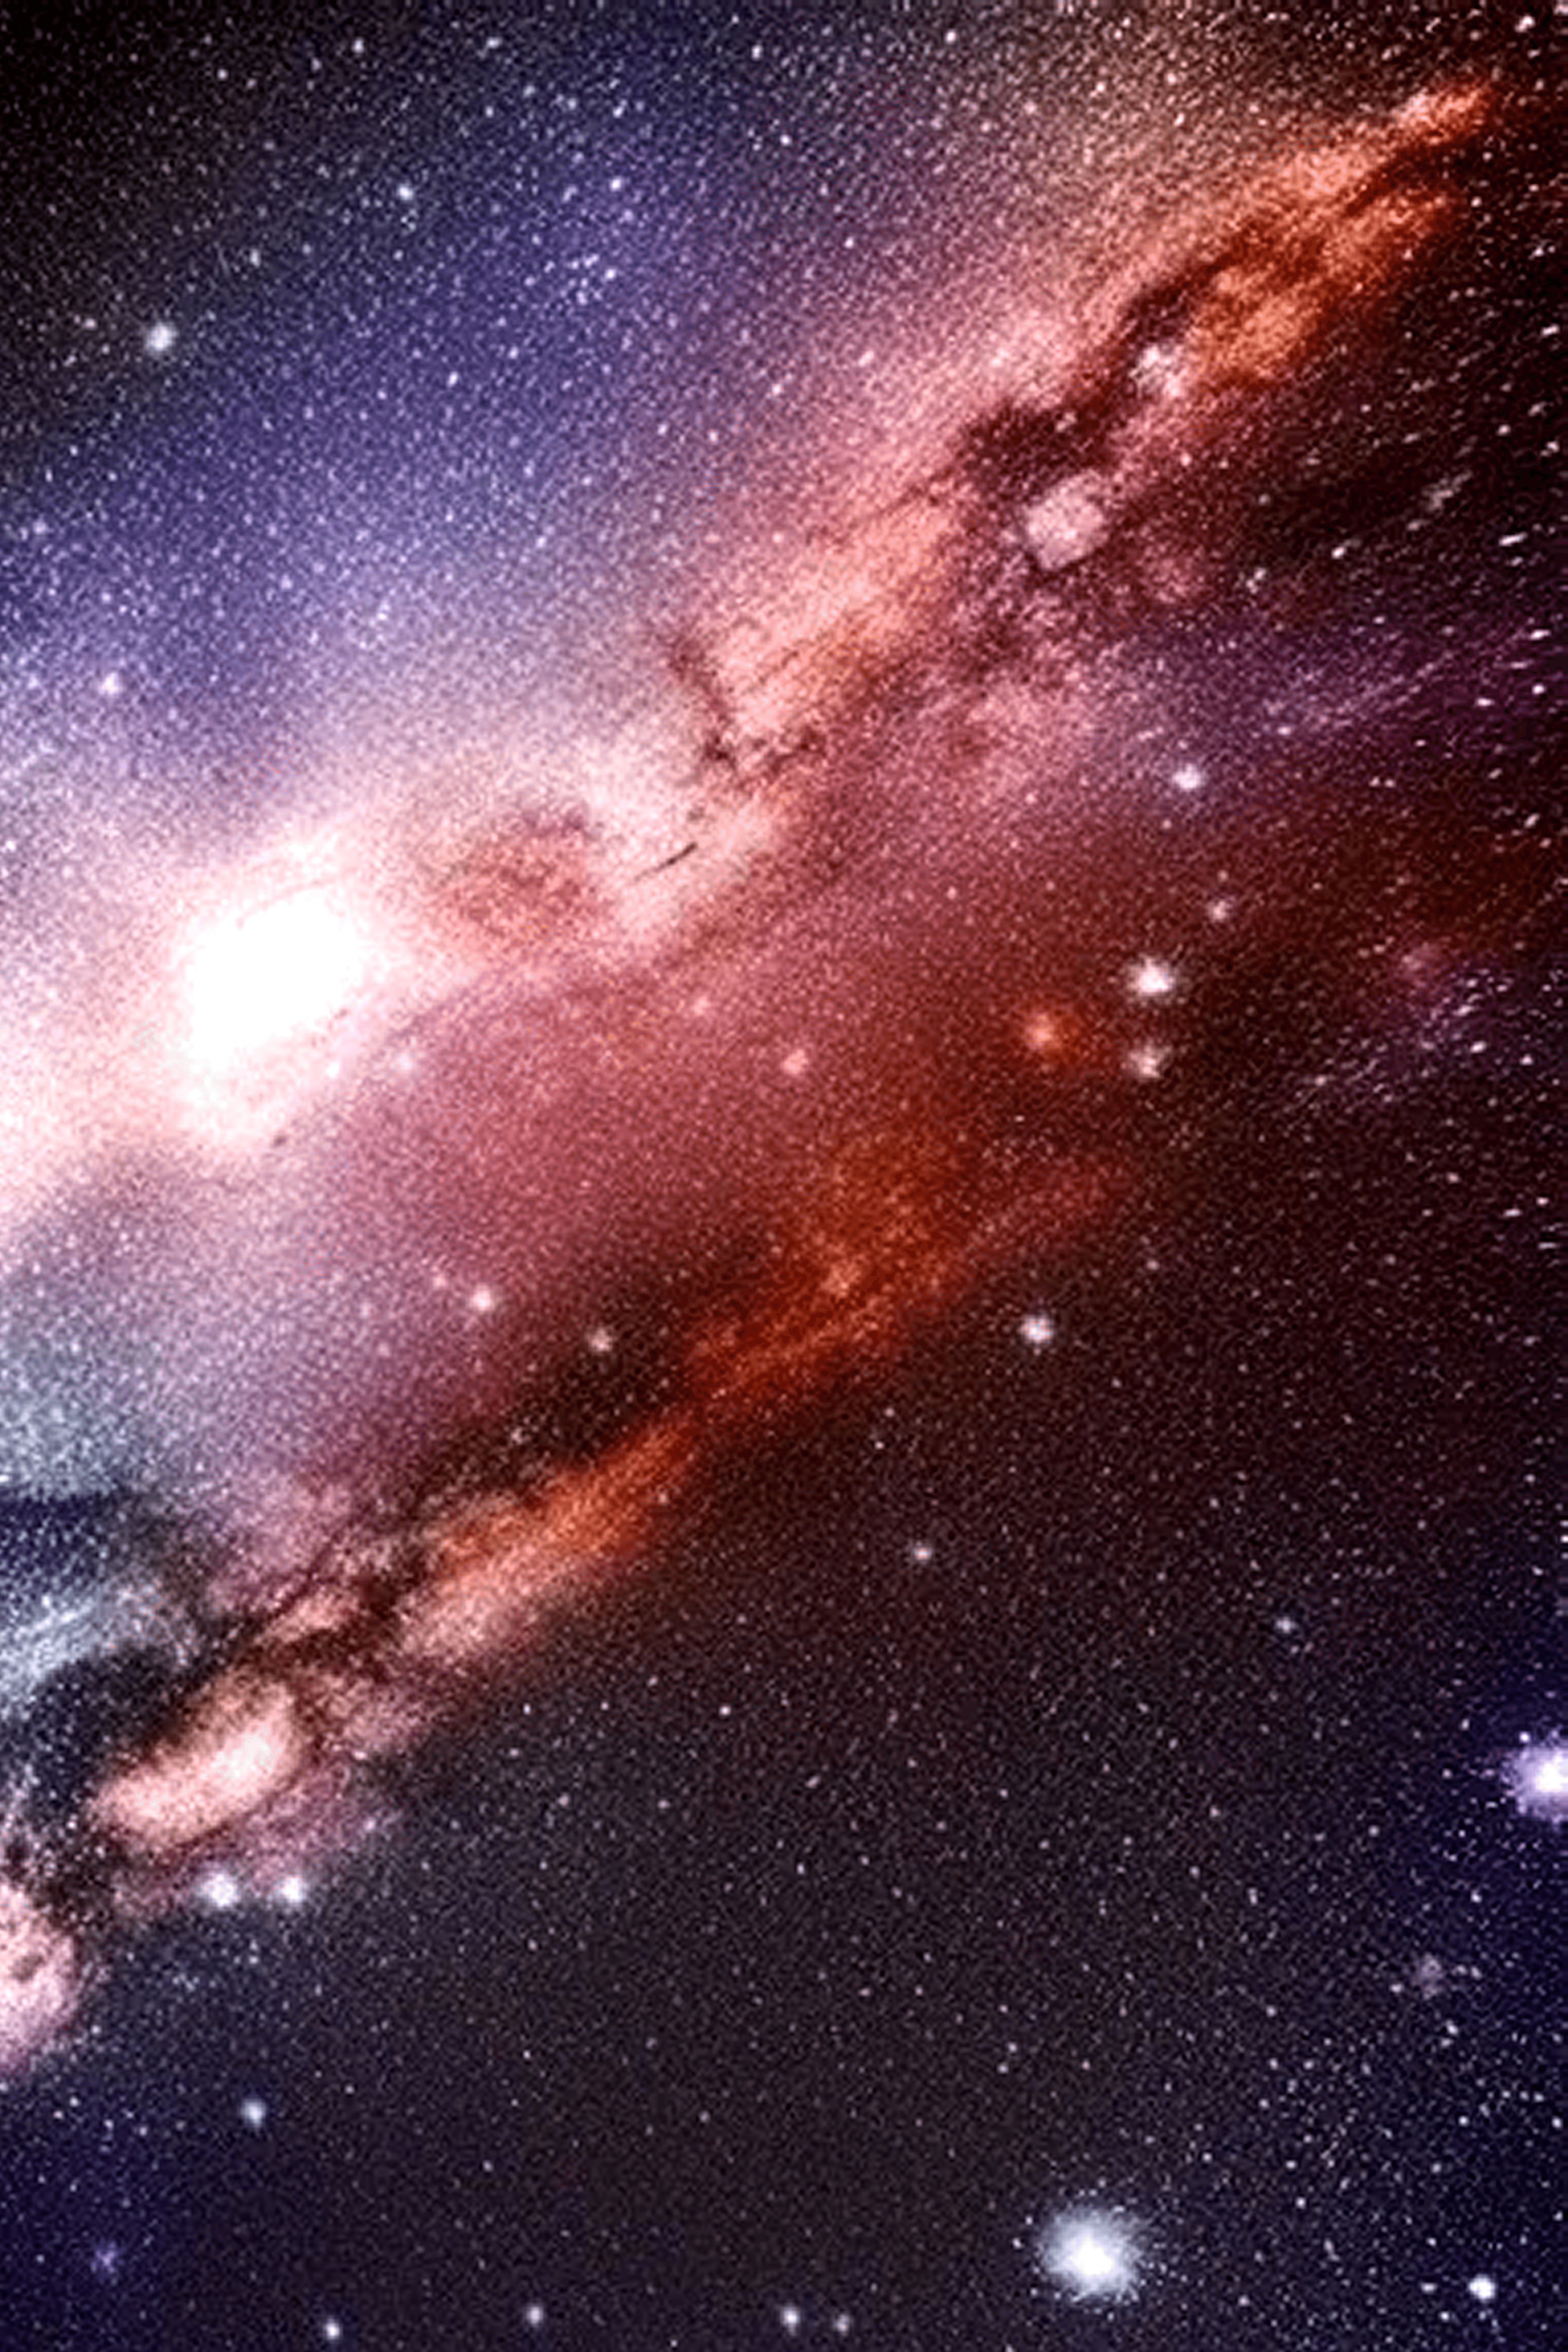 Milky Way AI Space Art created by Sollog